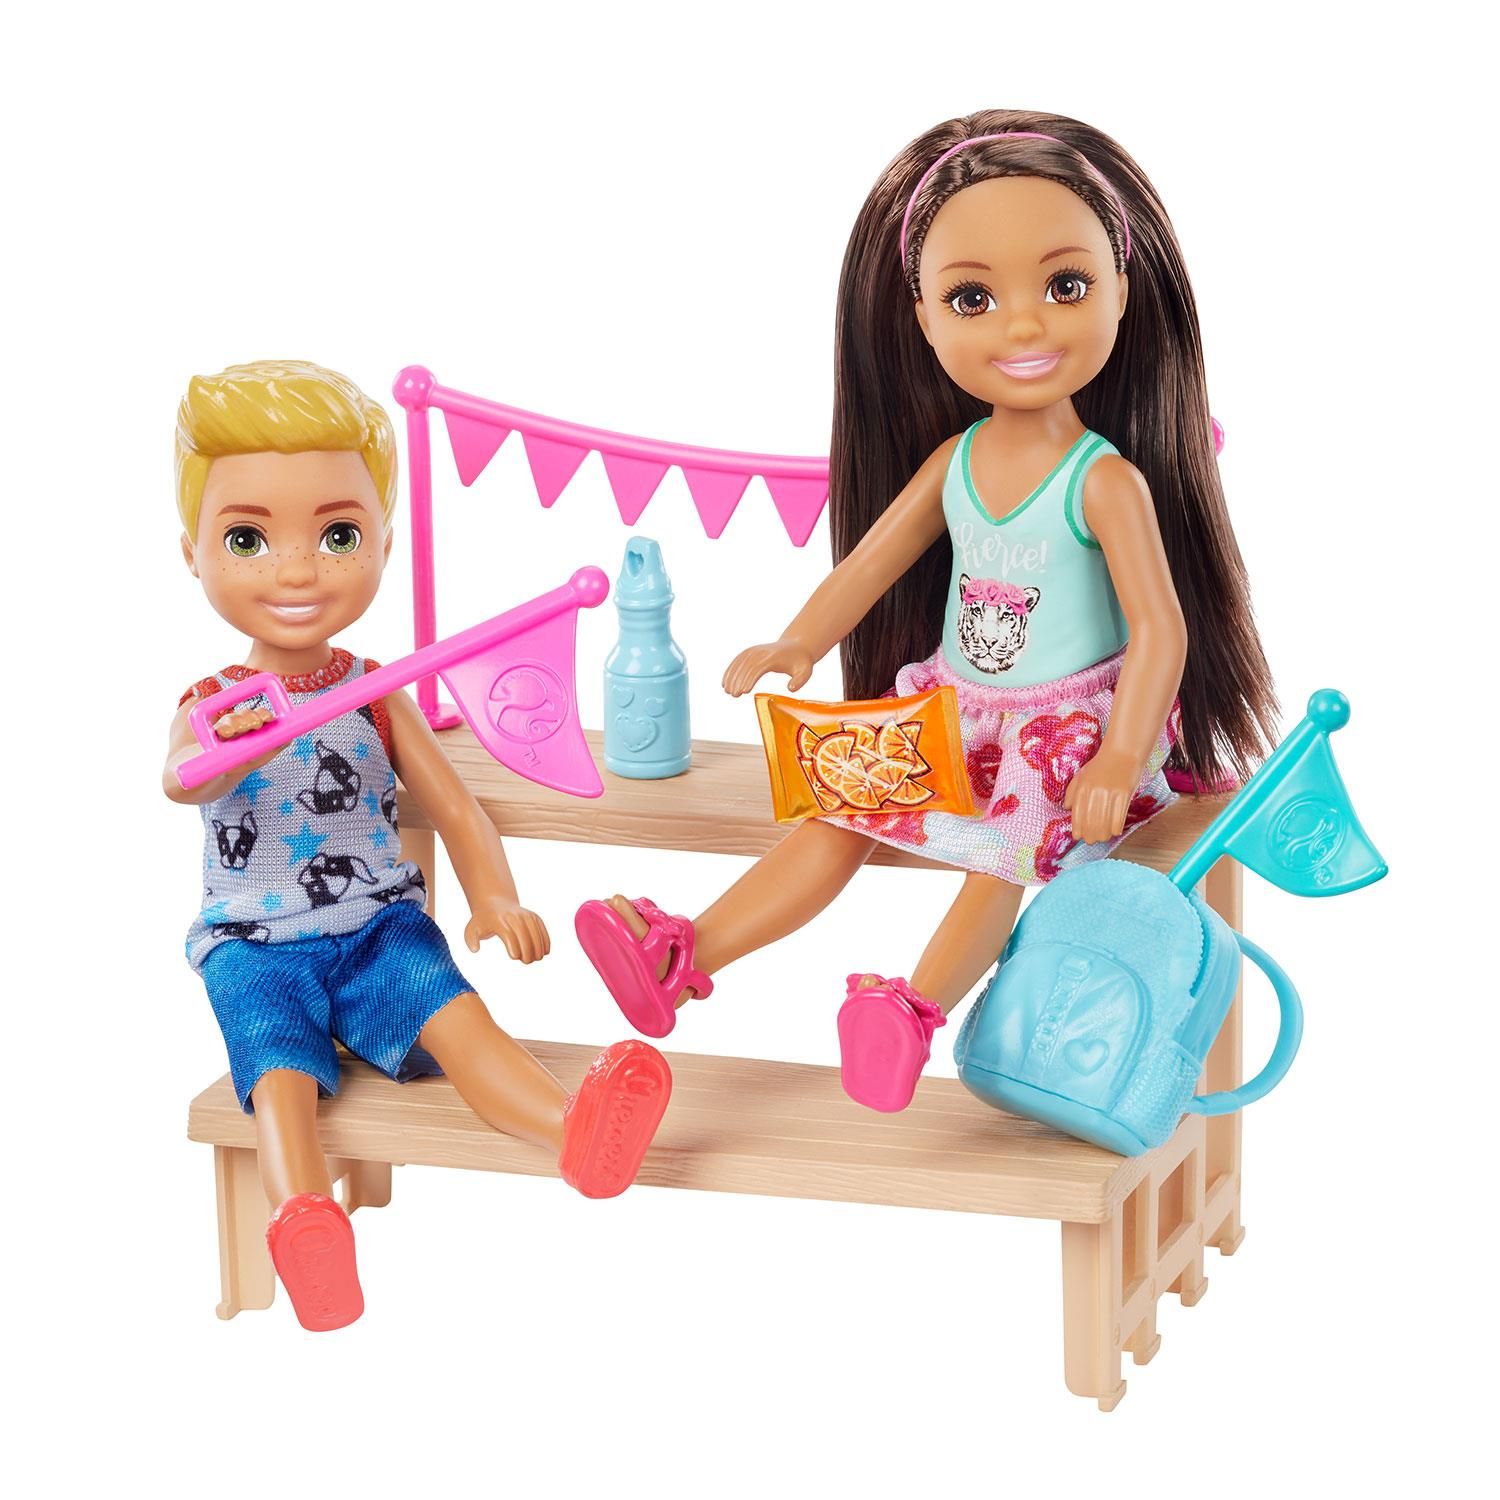 Young imaginations can play out so many sports stories with the Chelsea doll, inspired by Barbie Dreamhouse Adventures, and her soccer playset.


Two goals, each with an adjustable scoring board, attach to a field area where Chelsea can practice and play -- press down on her shoulders for 